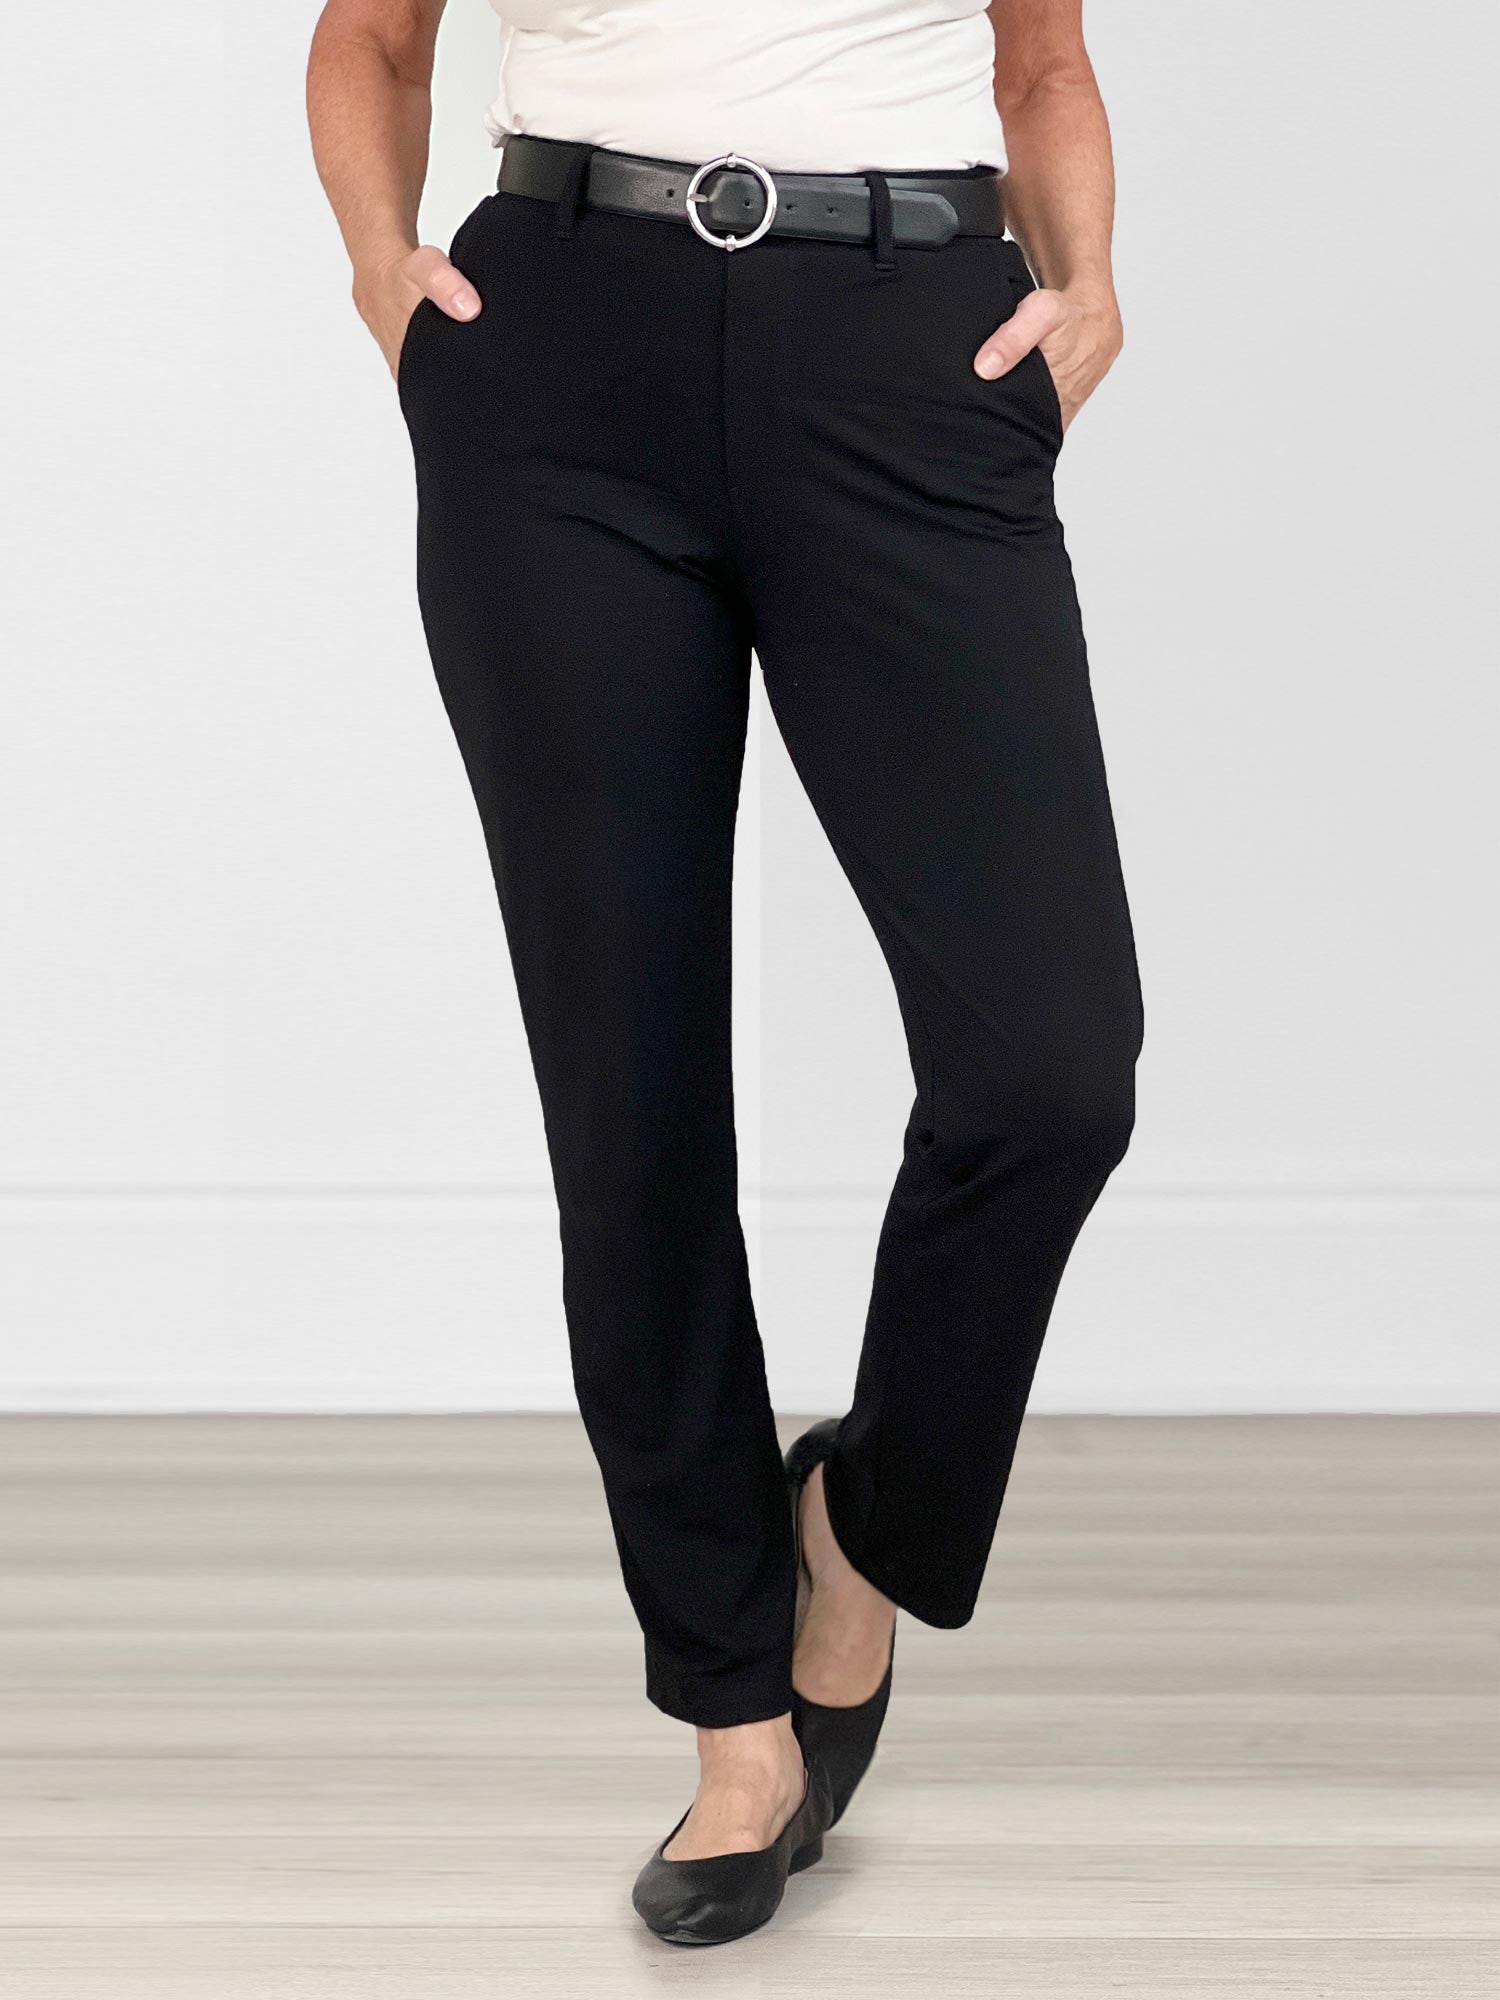 Asia mid-rise slim pant  Sustainable women's fashion made in